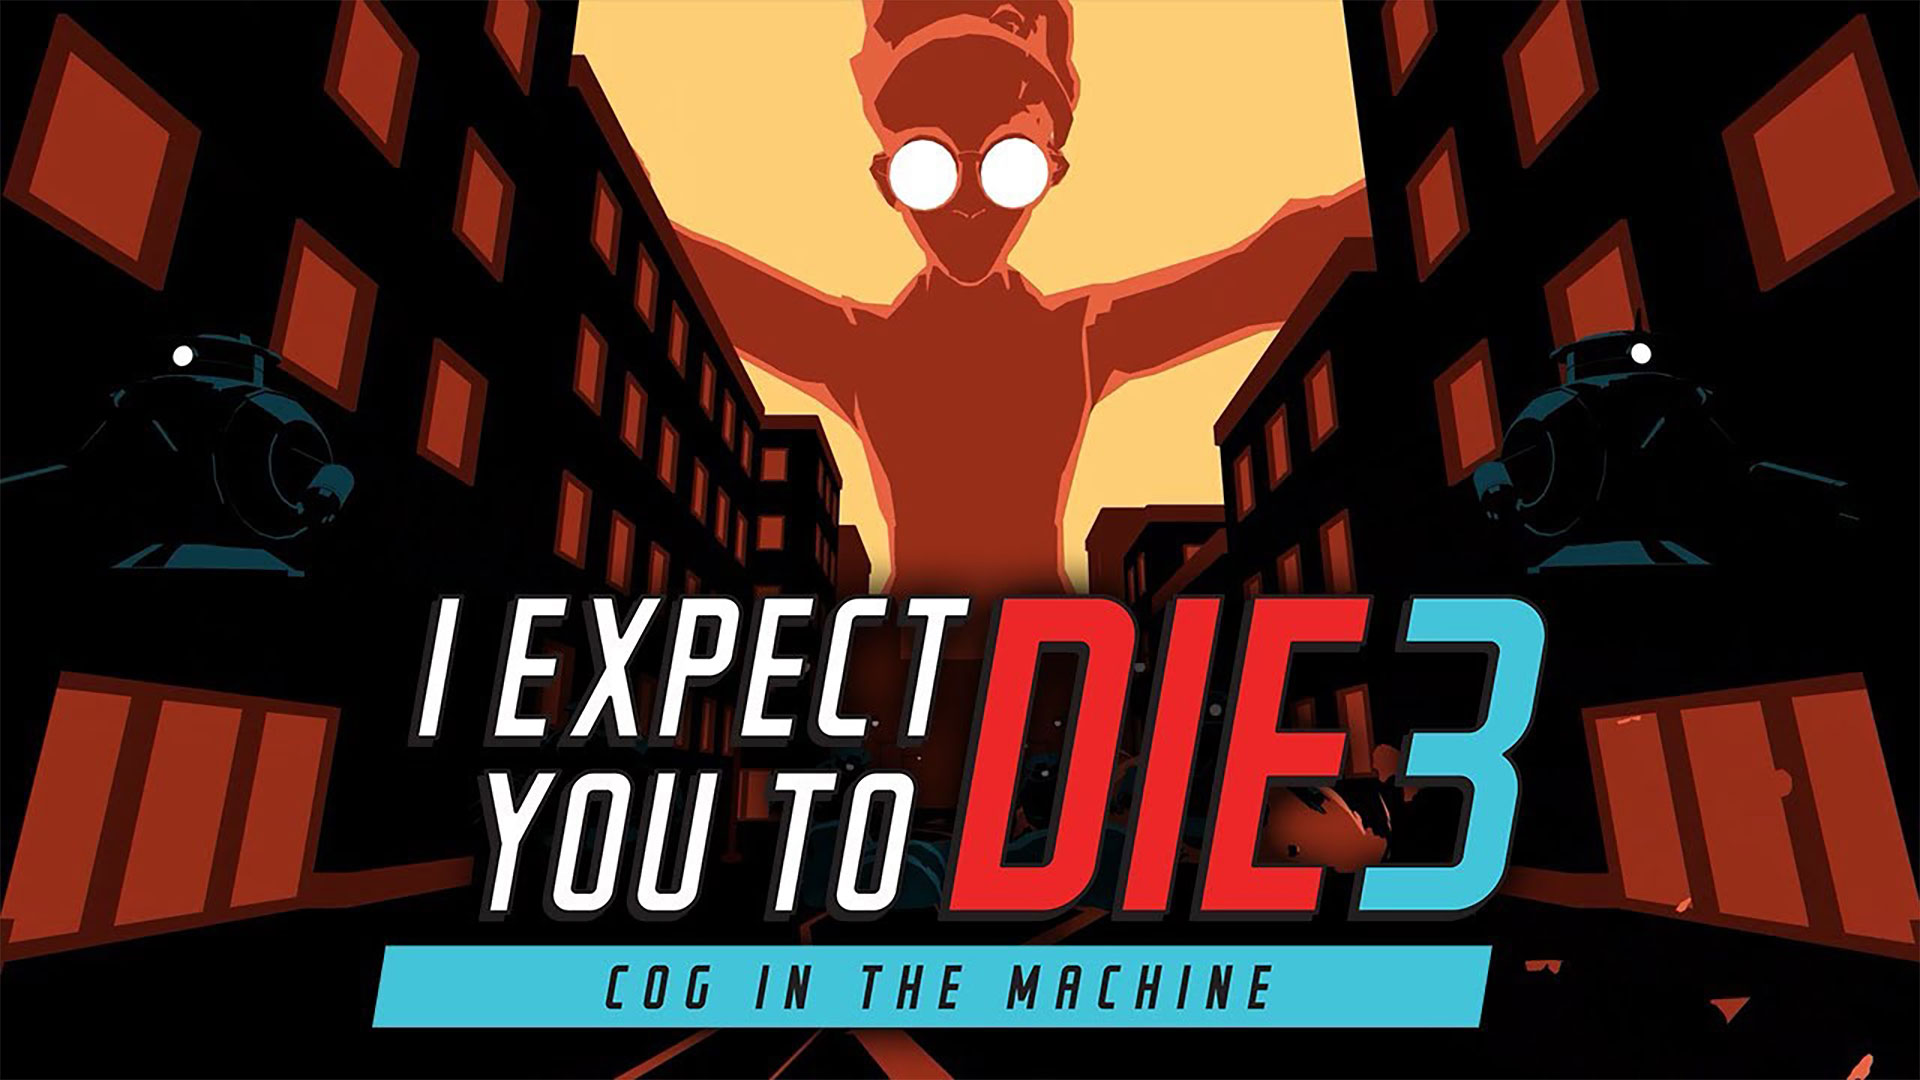 I Expect You to Die: Cog in the Machine | NYX Game Awards